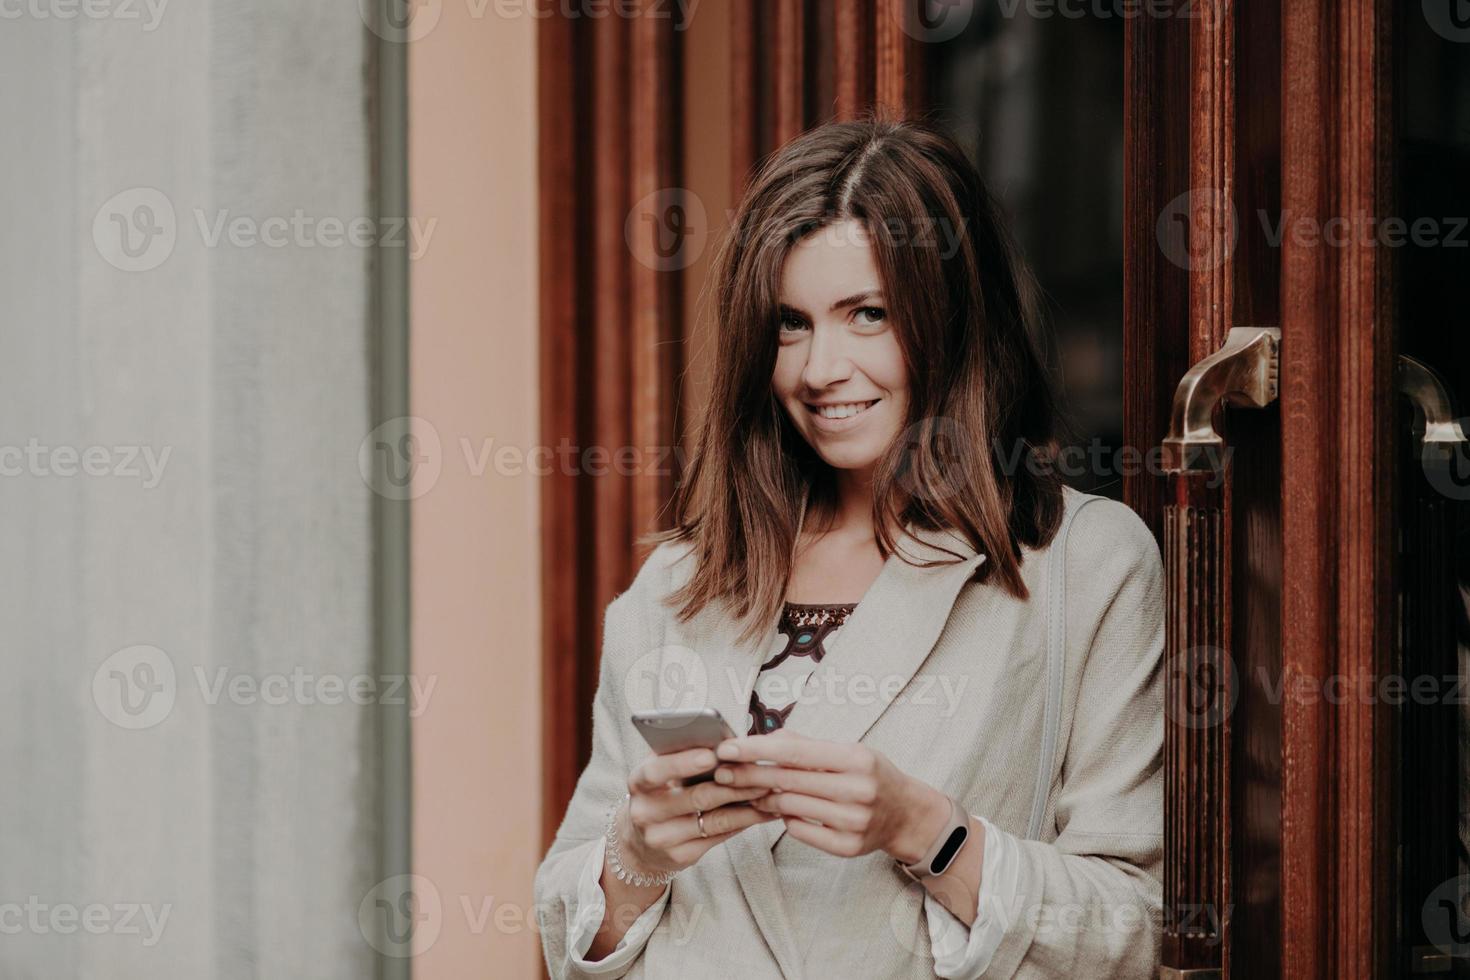 Brunette cheerful lovely woman texts email letter, uses mobile phone and free internet connection, dressed in white jacket, stands near doors of building. People, lifestyle, technology concept photo